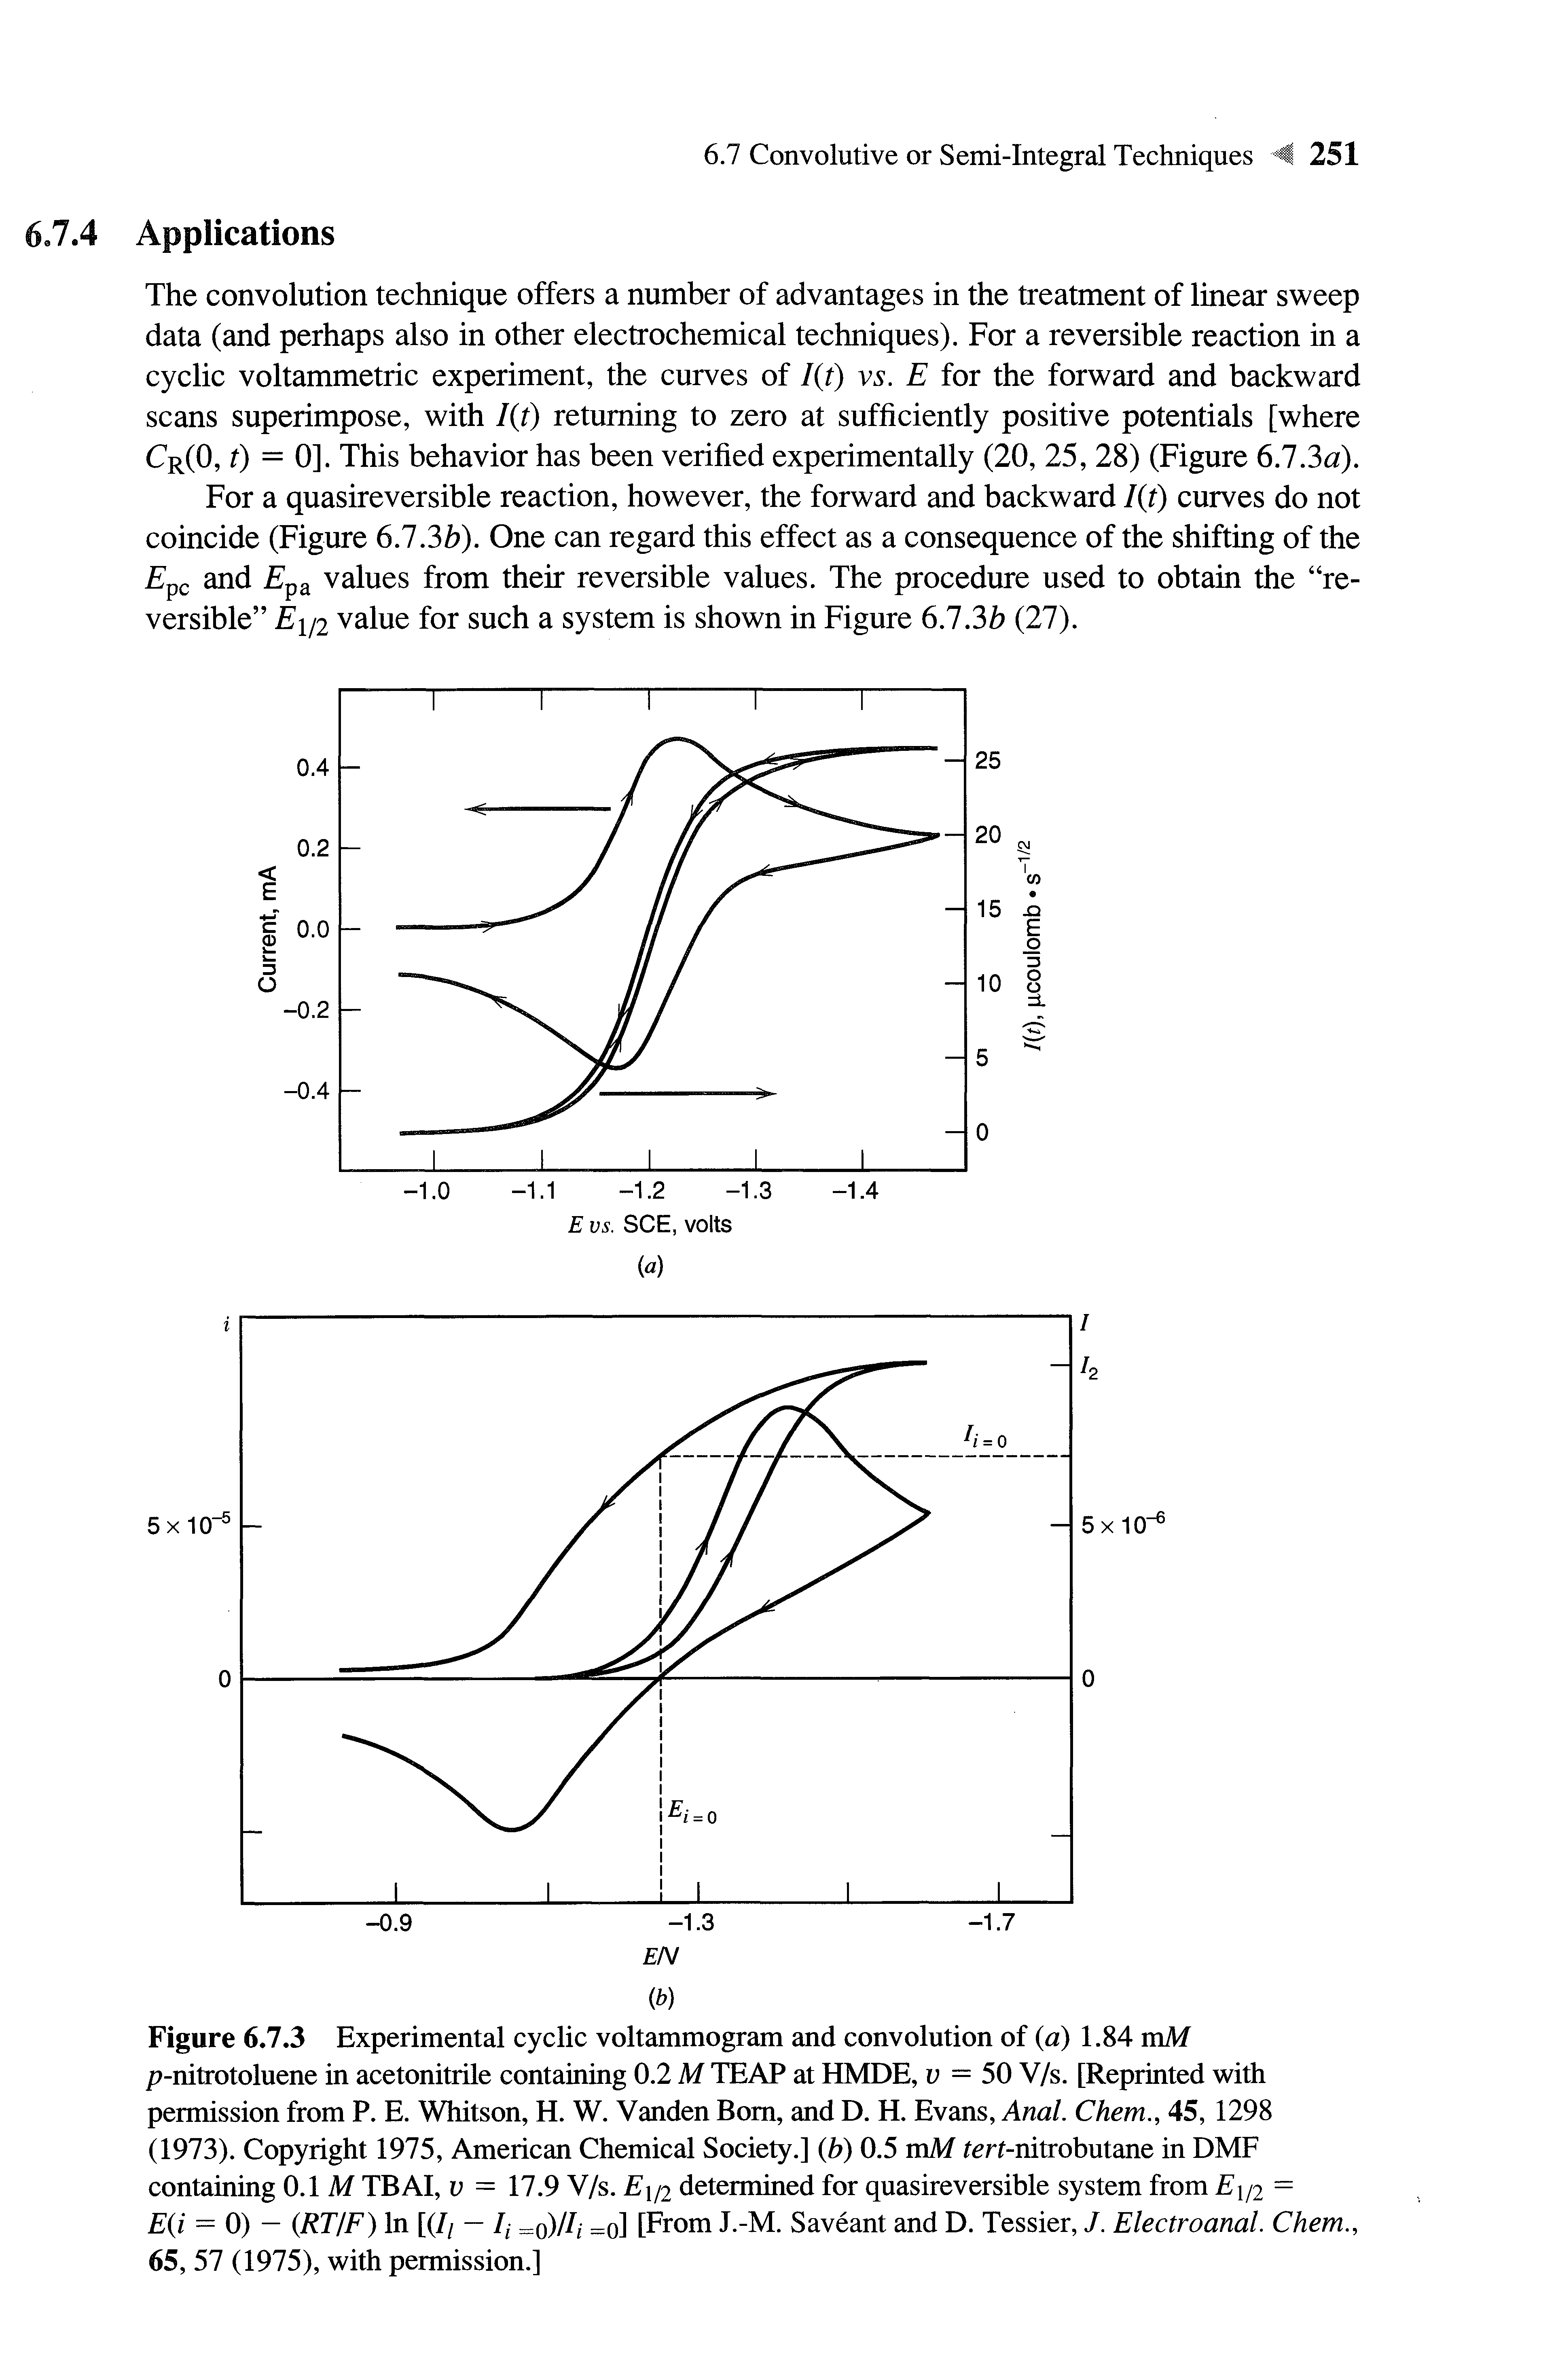 Figure 6.7.3 Experimental cyclic voltammogram and convolution of (a) 1.84 mM p-nitrotoluene in acetonitrile containing 0.2 M TEAP at HMDE, v = 50 V/s. [Reprinted with permission from P. E. Whitson, H. W. Vanden Bom, and D. H. Evans, Anal. Chem., 45, 1298 (1973). Copyright 1975, American Chemical Society.] (b) 0.5 mM fert-nitrobutane in DMF containing 0.1 M TBAI, v = 17.9 V/s. E1/2 determined for quasireversible system from E1/2 =...